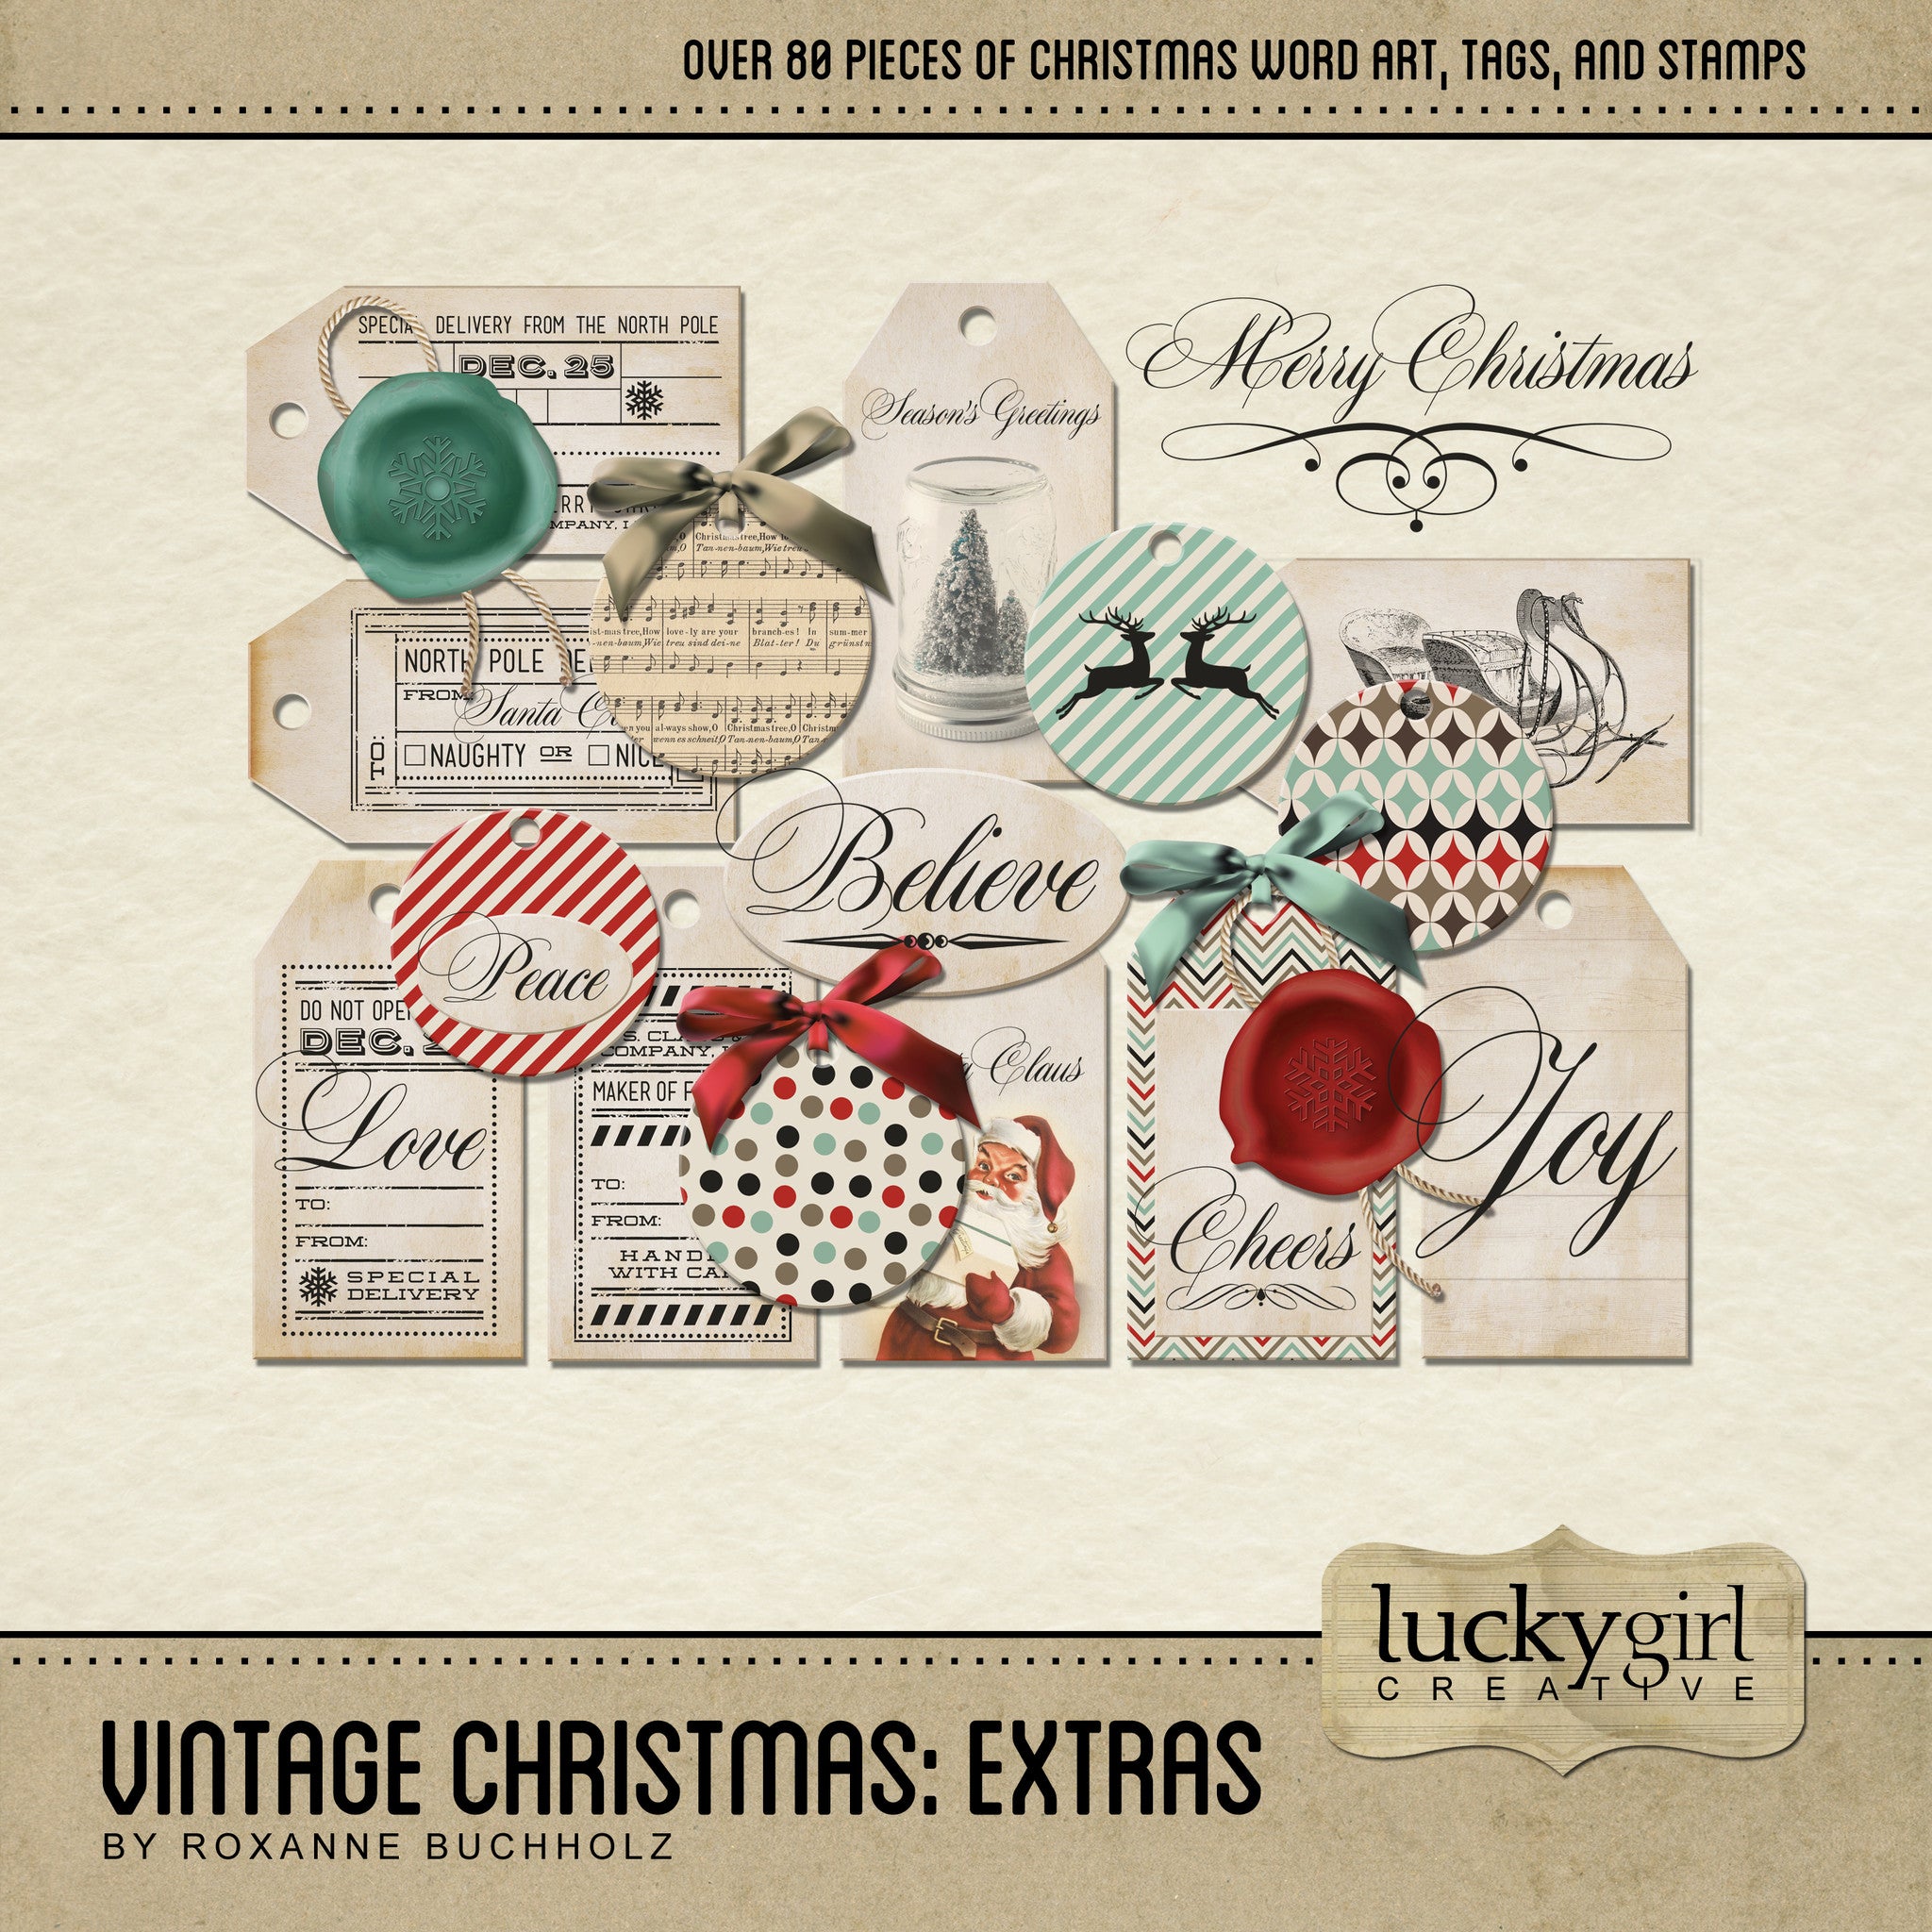 Filled with old-fashioned charm and a modern twist, this Vintage Christmas Extras Digital Scrapbook Kit is perfect for your personal scrapbooking projects and holiday cards. Works great as a stand-alone holiday digital art collection filled with lots of fun word art, tags, and .png stamps or pairs perfectly with Vintage Christmas 1, Vintage Christmas 2, and Vintage Christmas: Papers Digital Scrapbook Kits to extend your holiday scrapbooking projects.